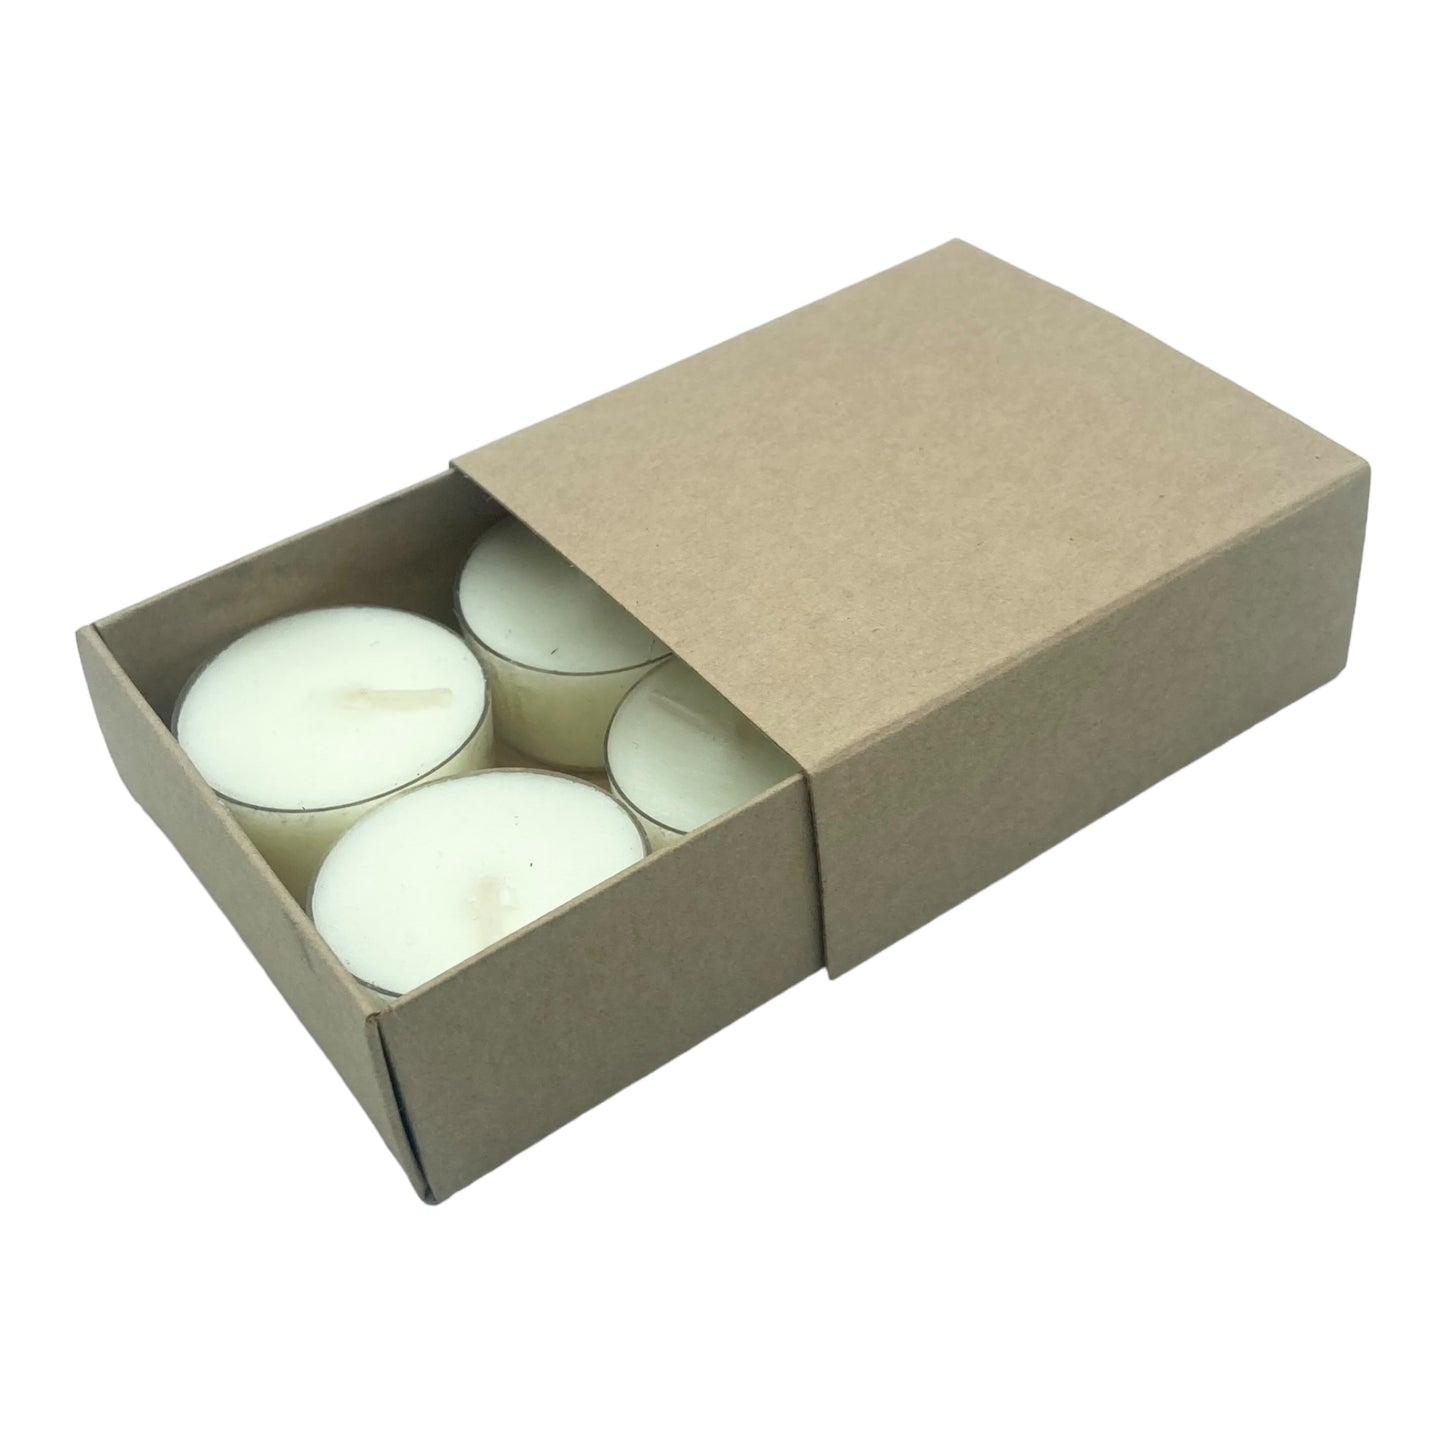 TEALIGHT CANDLE BOX WITH SLEEVE  for 6 Tealights - KRAFT (Pack of 10)